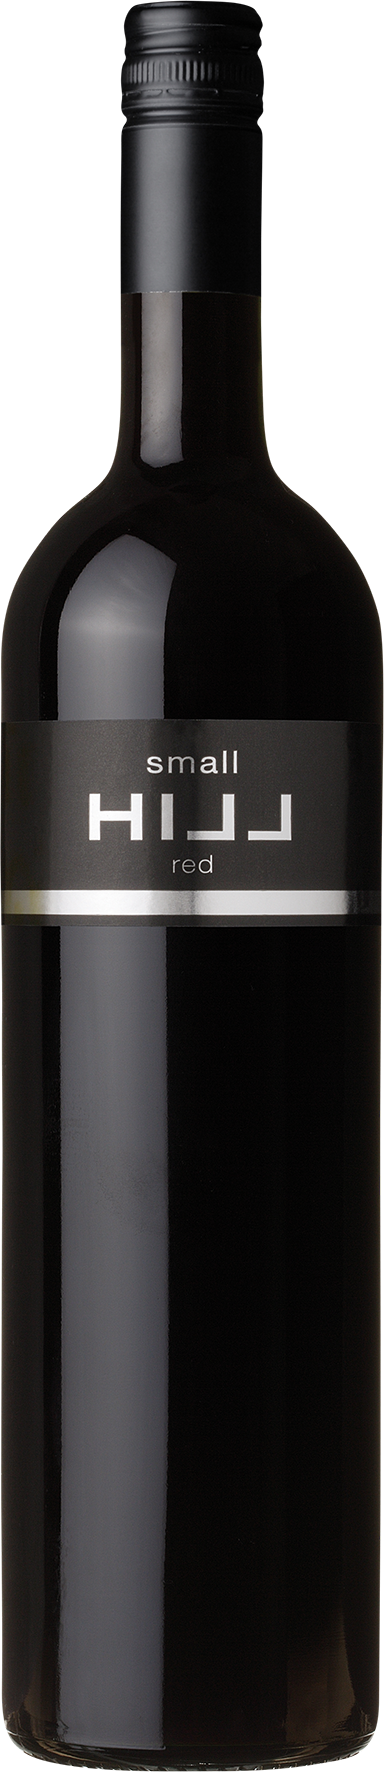 Small Red Hill 2021 0,75 l** - (7/14)